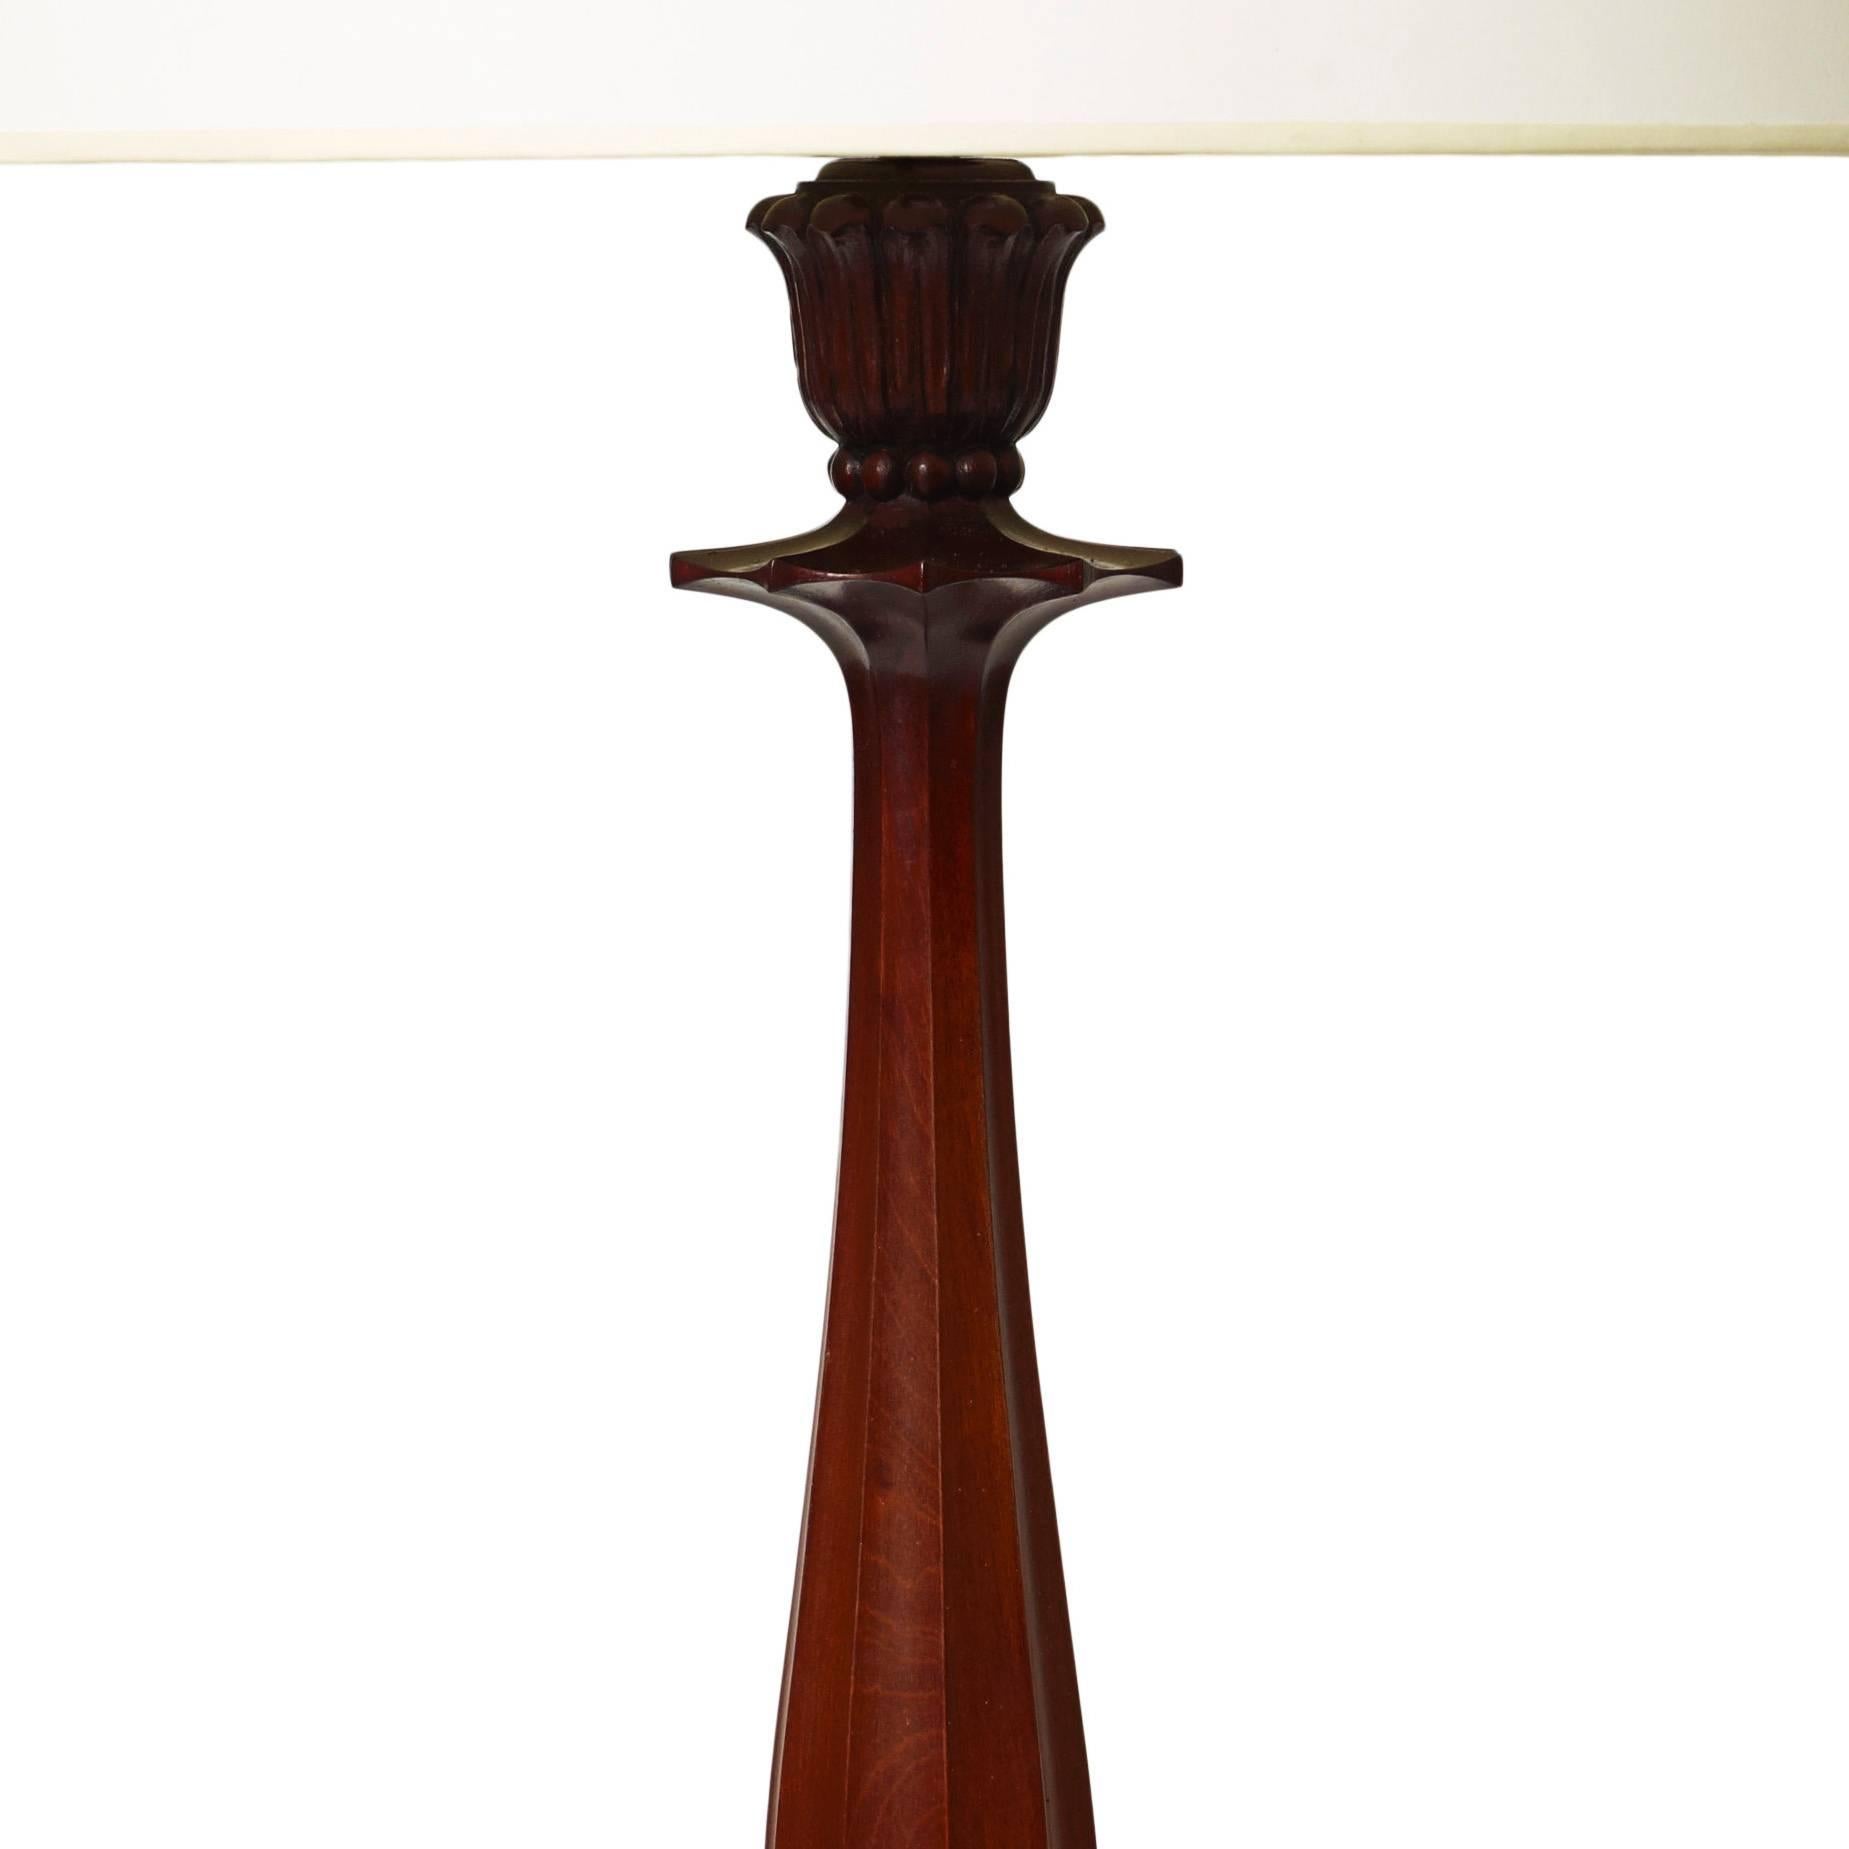 Art Nouveau Table Lamp with Fine Carving in Mahogany by Johan Rohde For Sale